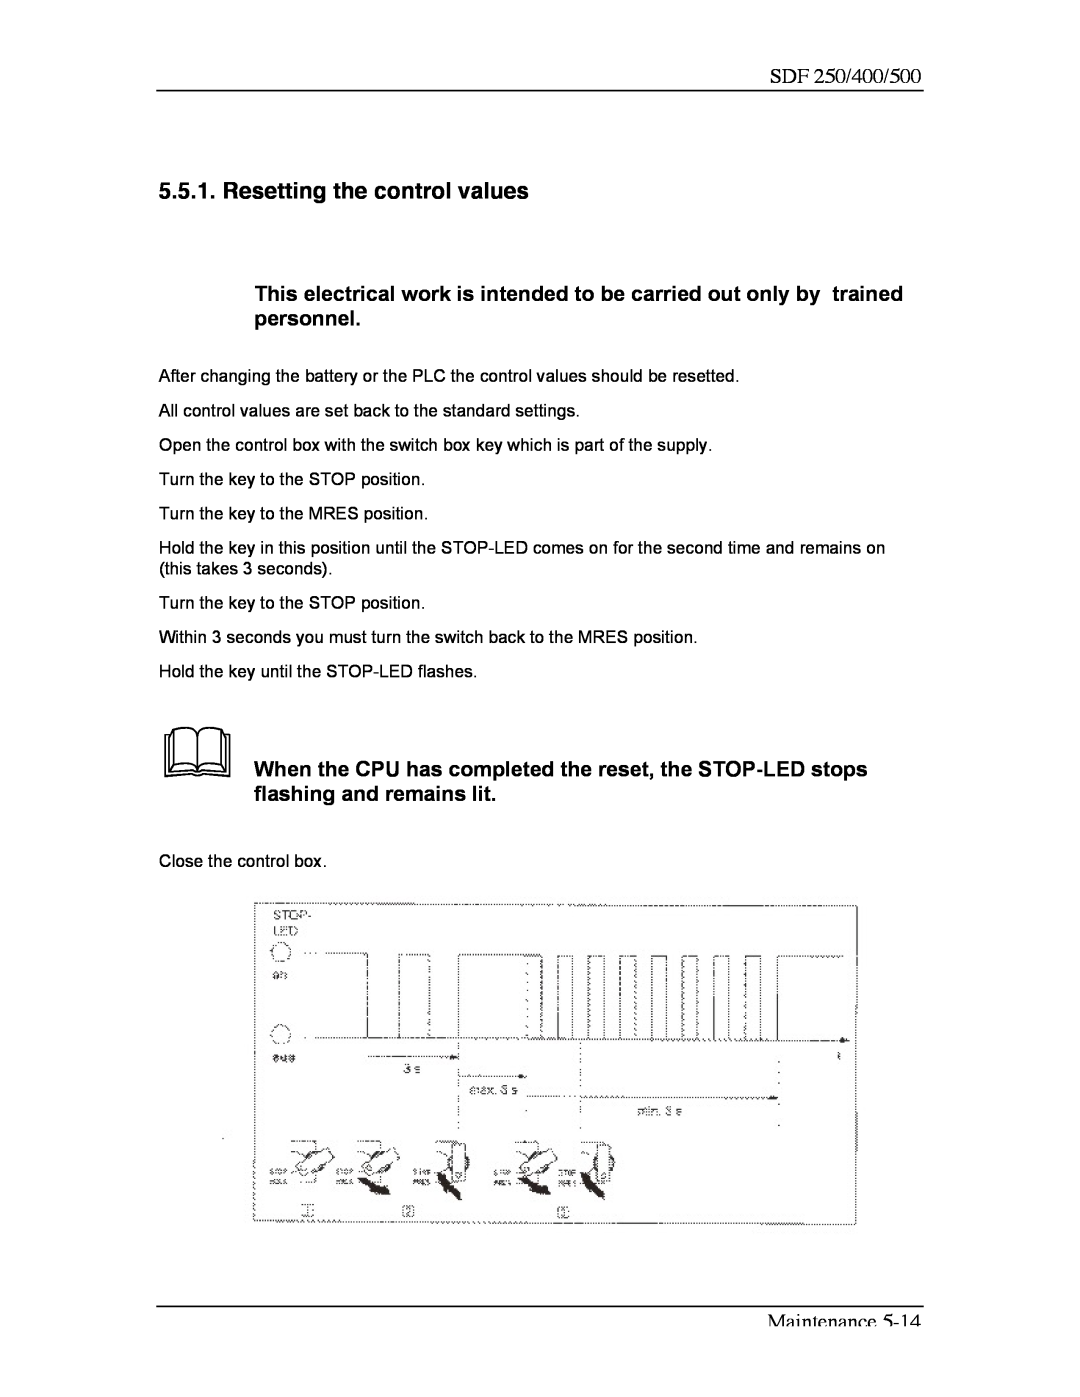 Sterling SDF 400, SDF 250, SDF 500 manual Resetting the control values 